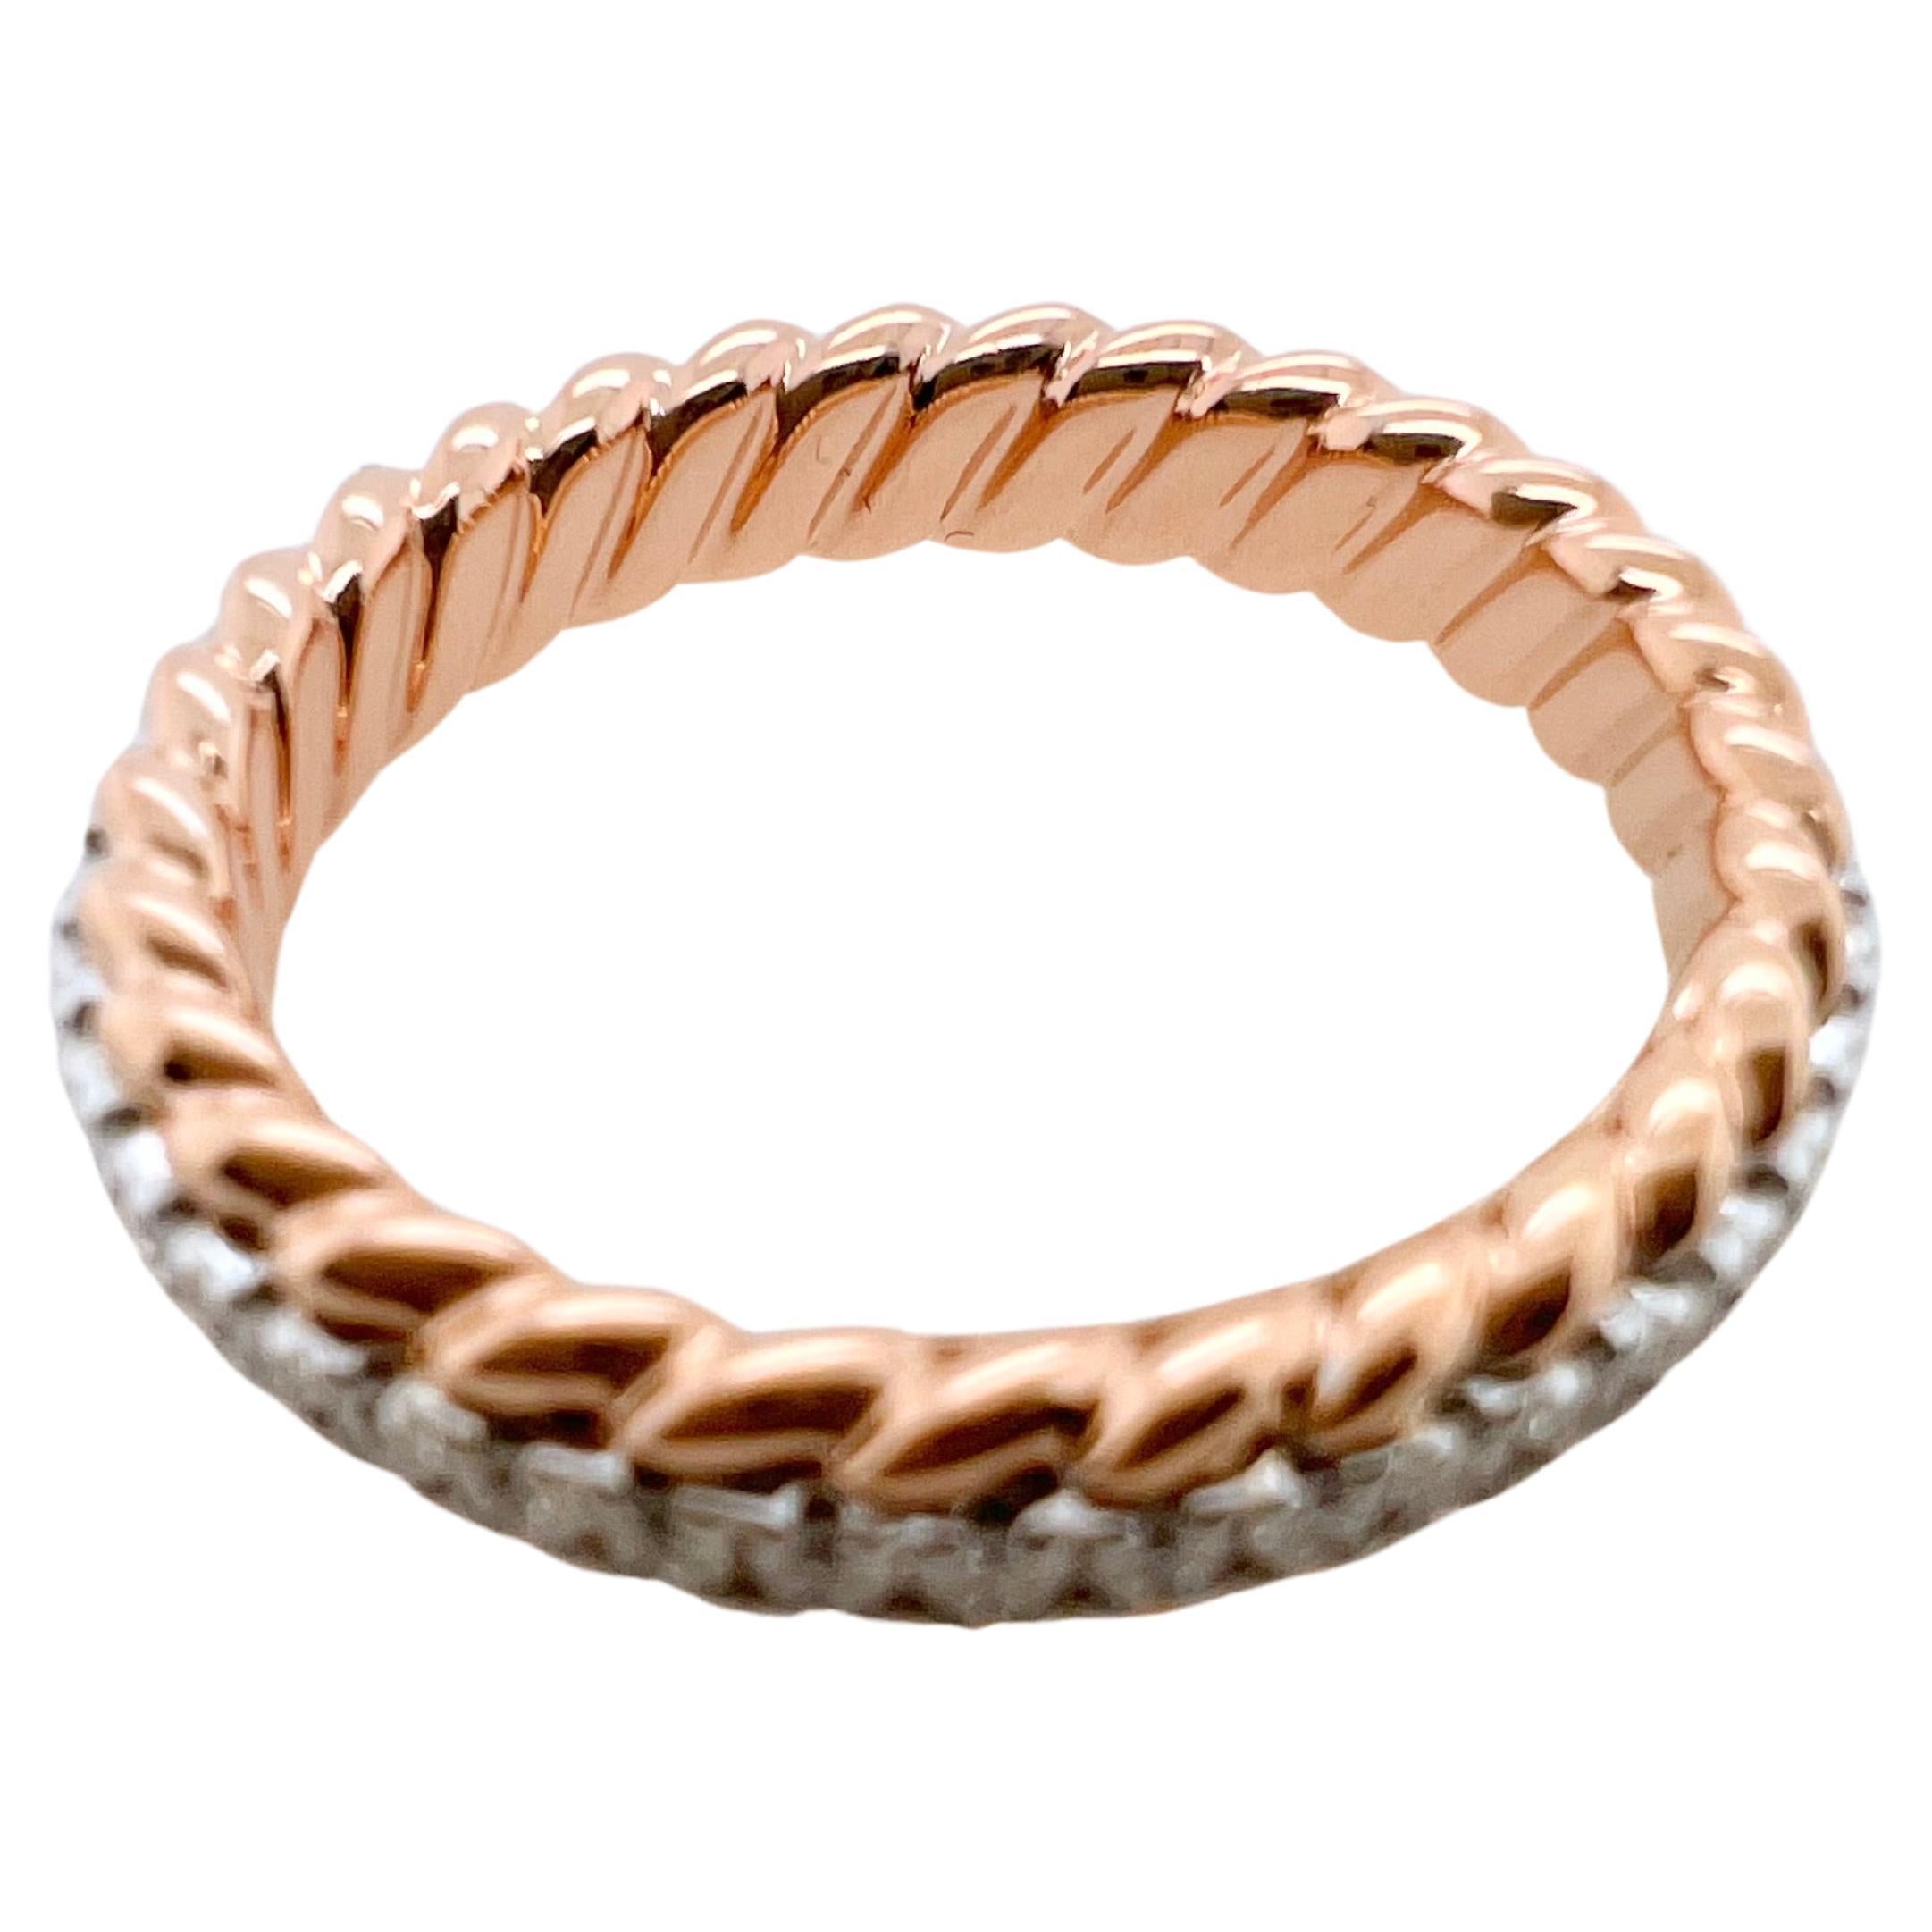 This amazing band will be your go to favorites.  This individual band is made in 18k rose gold with round brilliant diamonds prong set.  The outer edges have a unique rope style trim that give texture and character.  The solid gold is made sturdy so